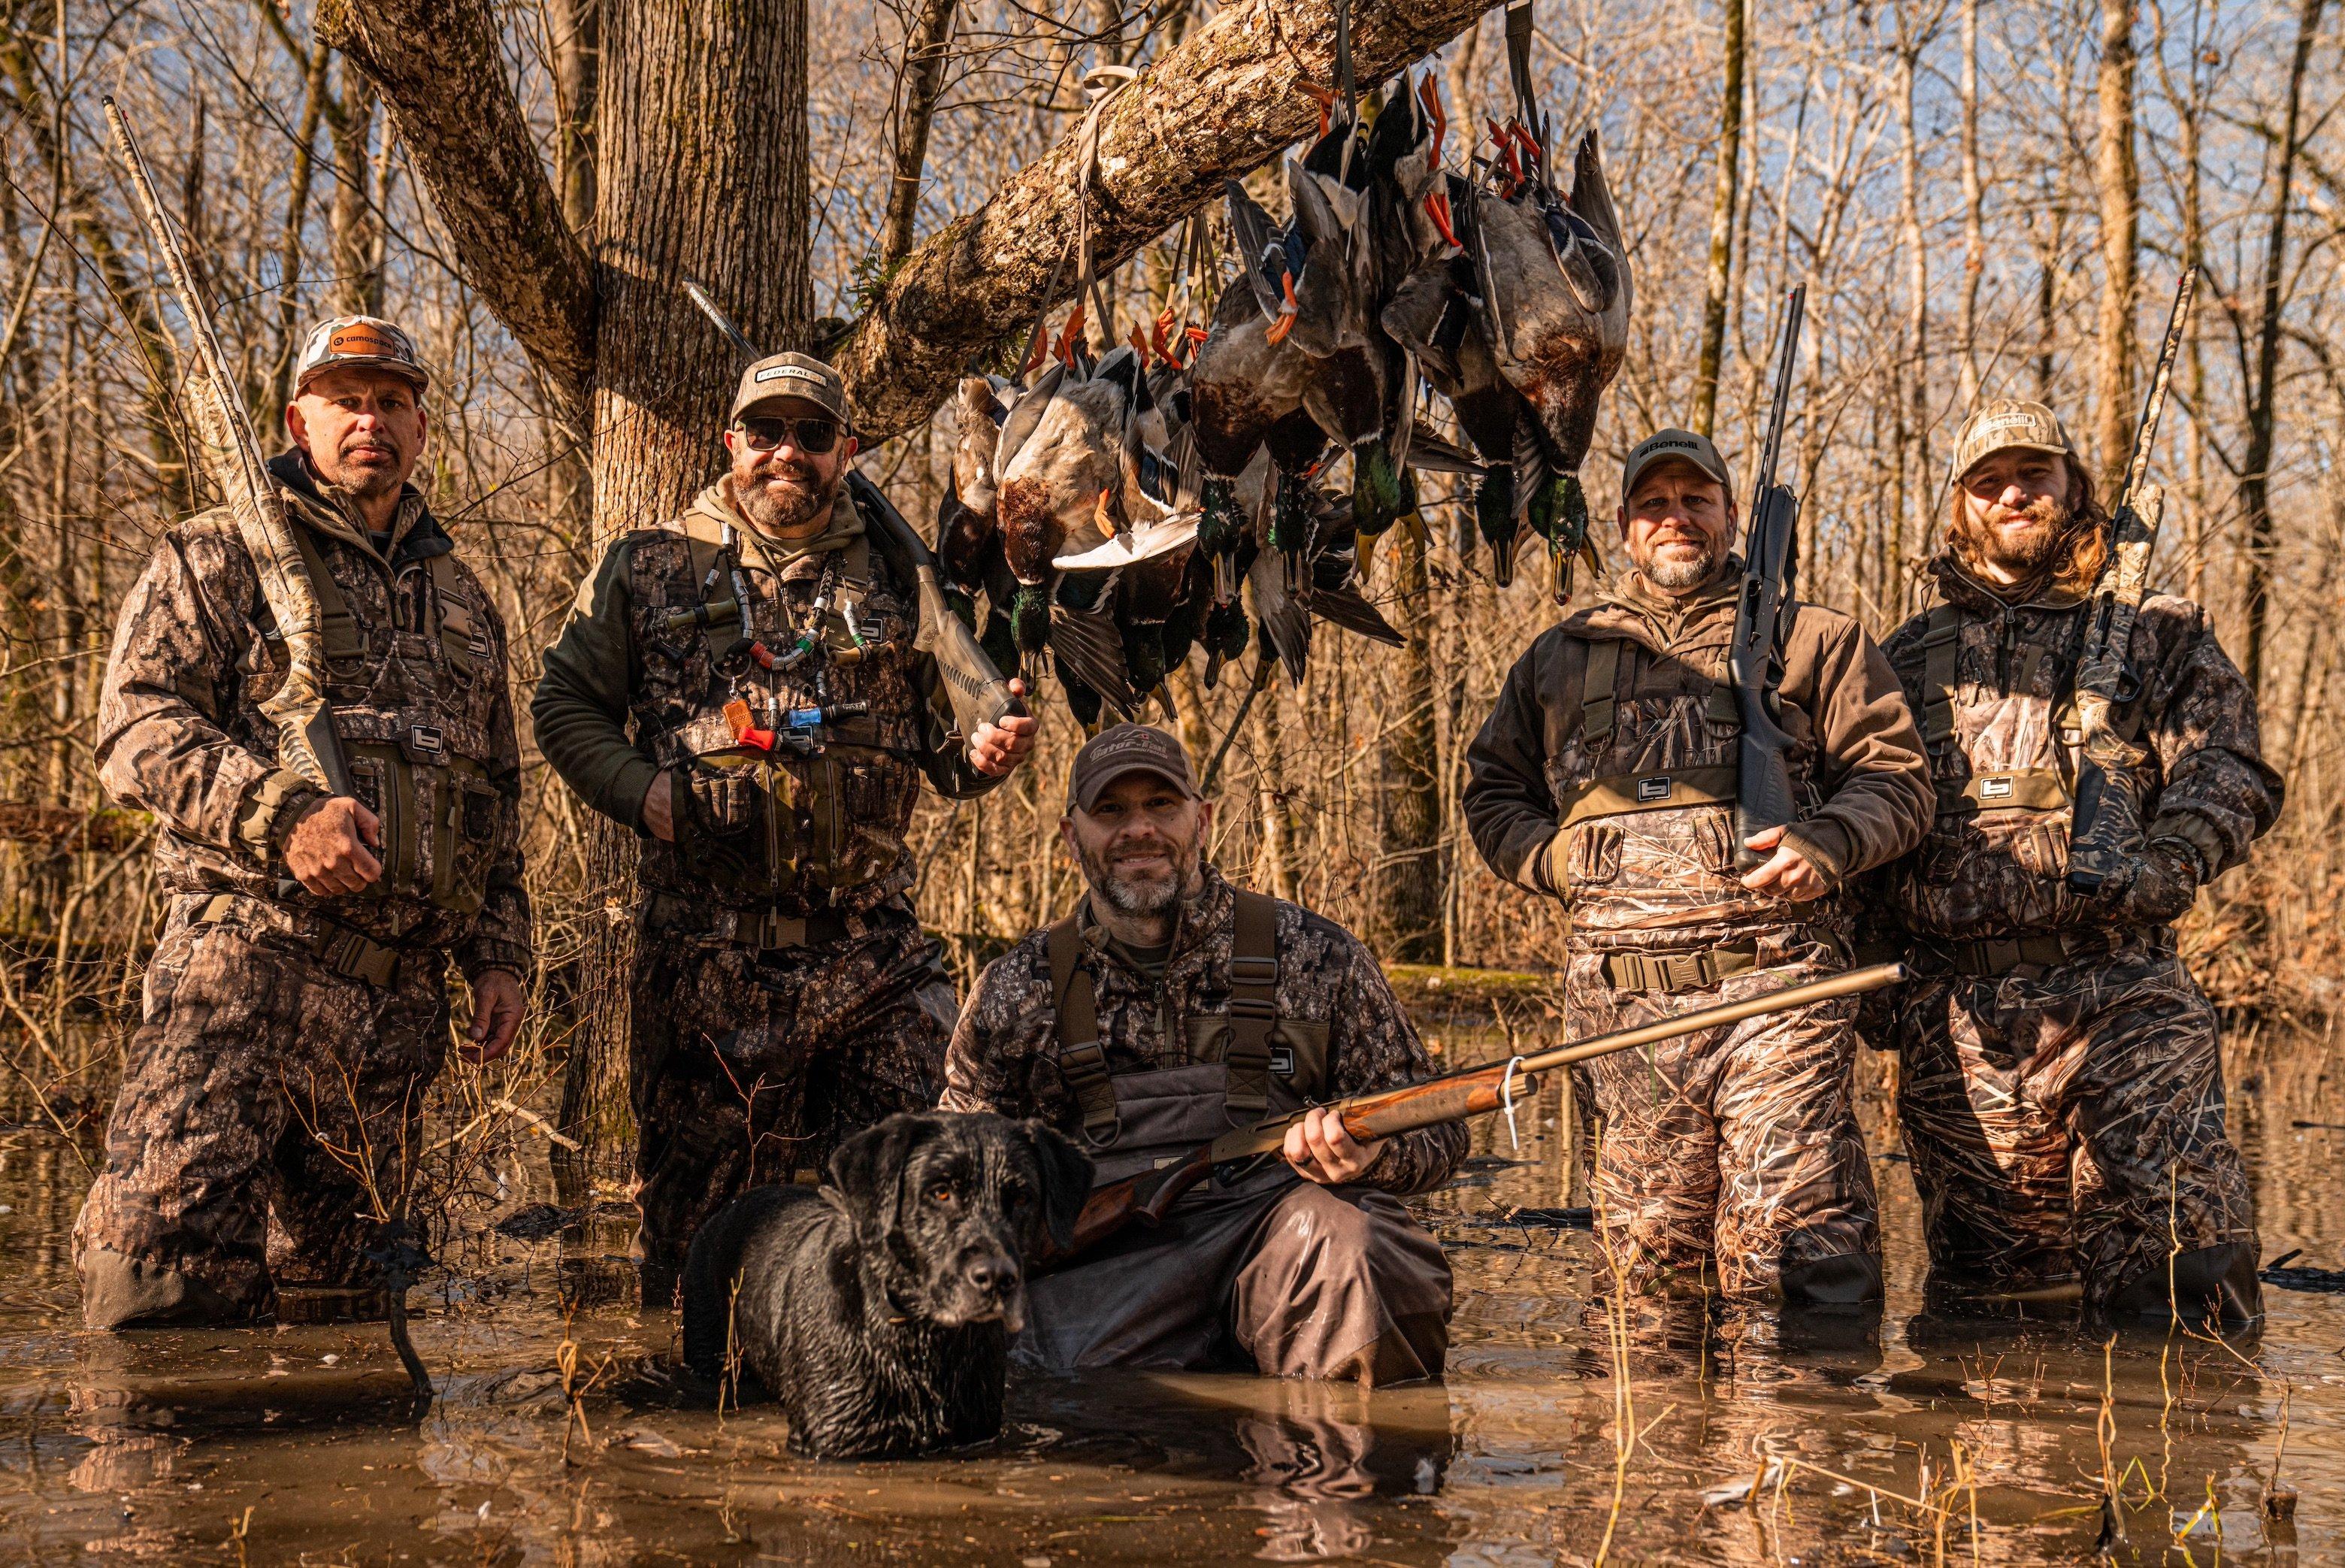 CamoSpace founder Denny Reid (left) with Chad Belding and buddies following a good flooded timber duck hunt. 